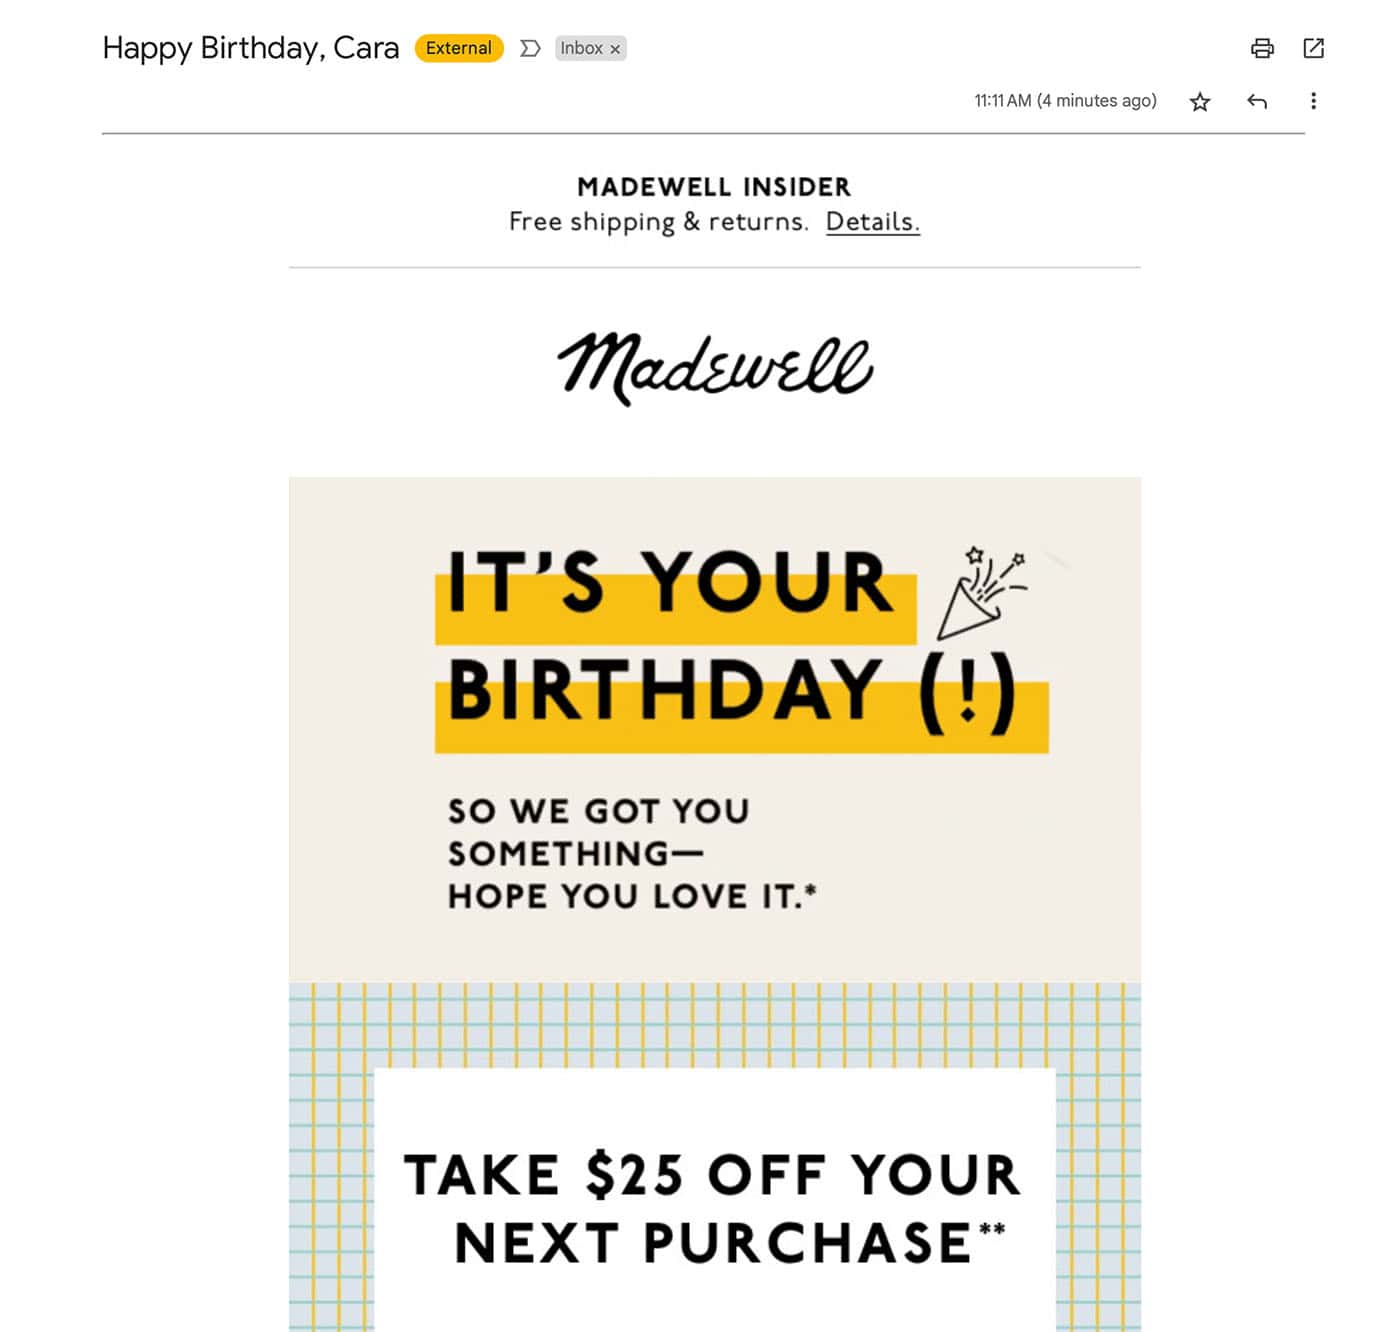 Example personalized email.